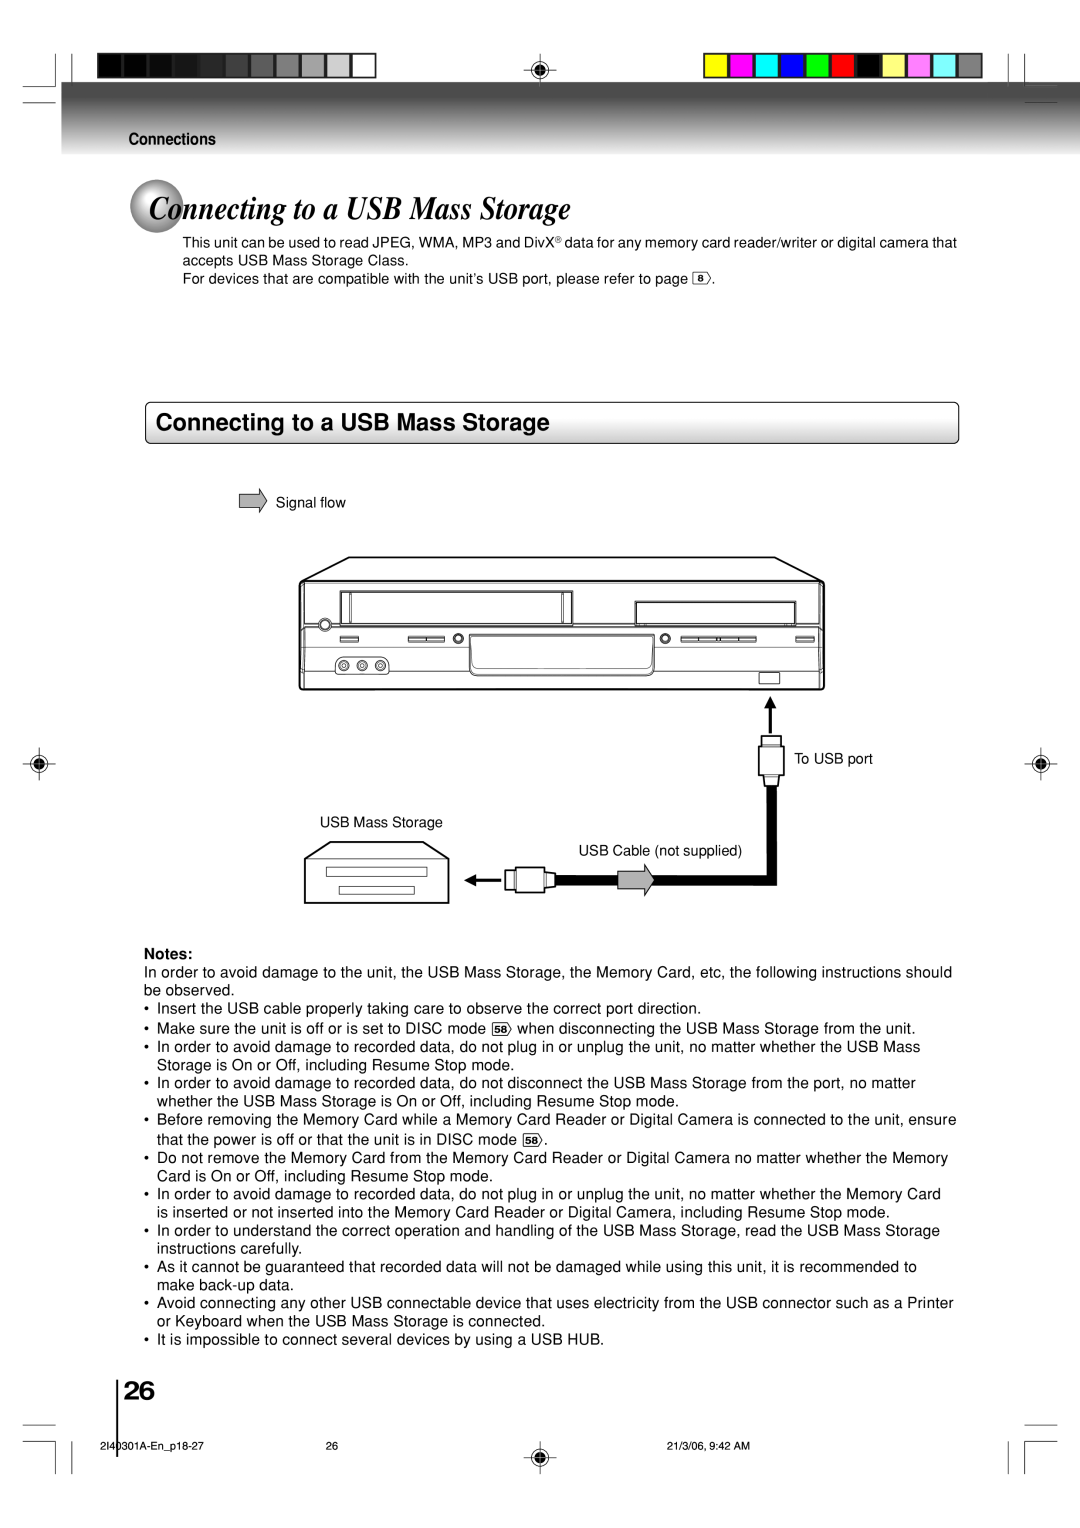 Toshiba SD-V594SC owner manual Connecting to a USB Mass Storage, Notes 